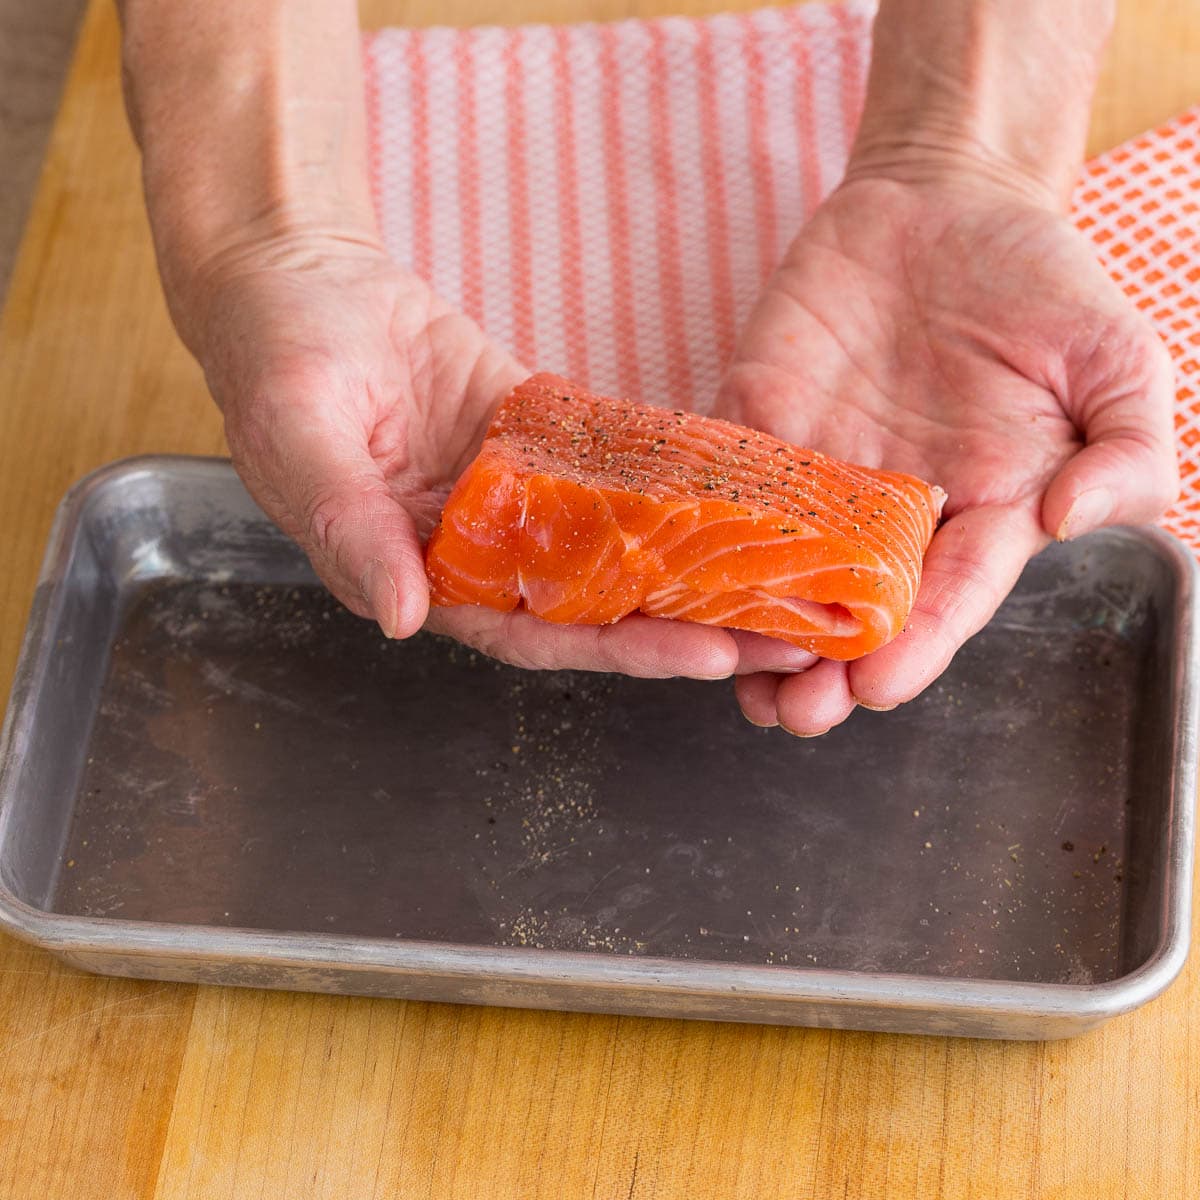 Folded salmon creates a more even piece of fish for cooking.